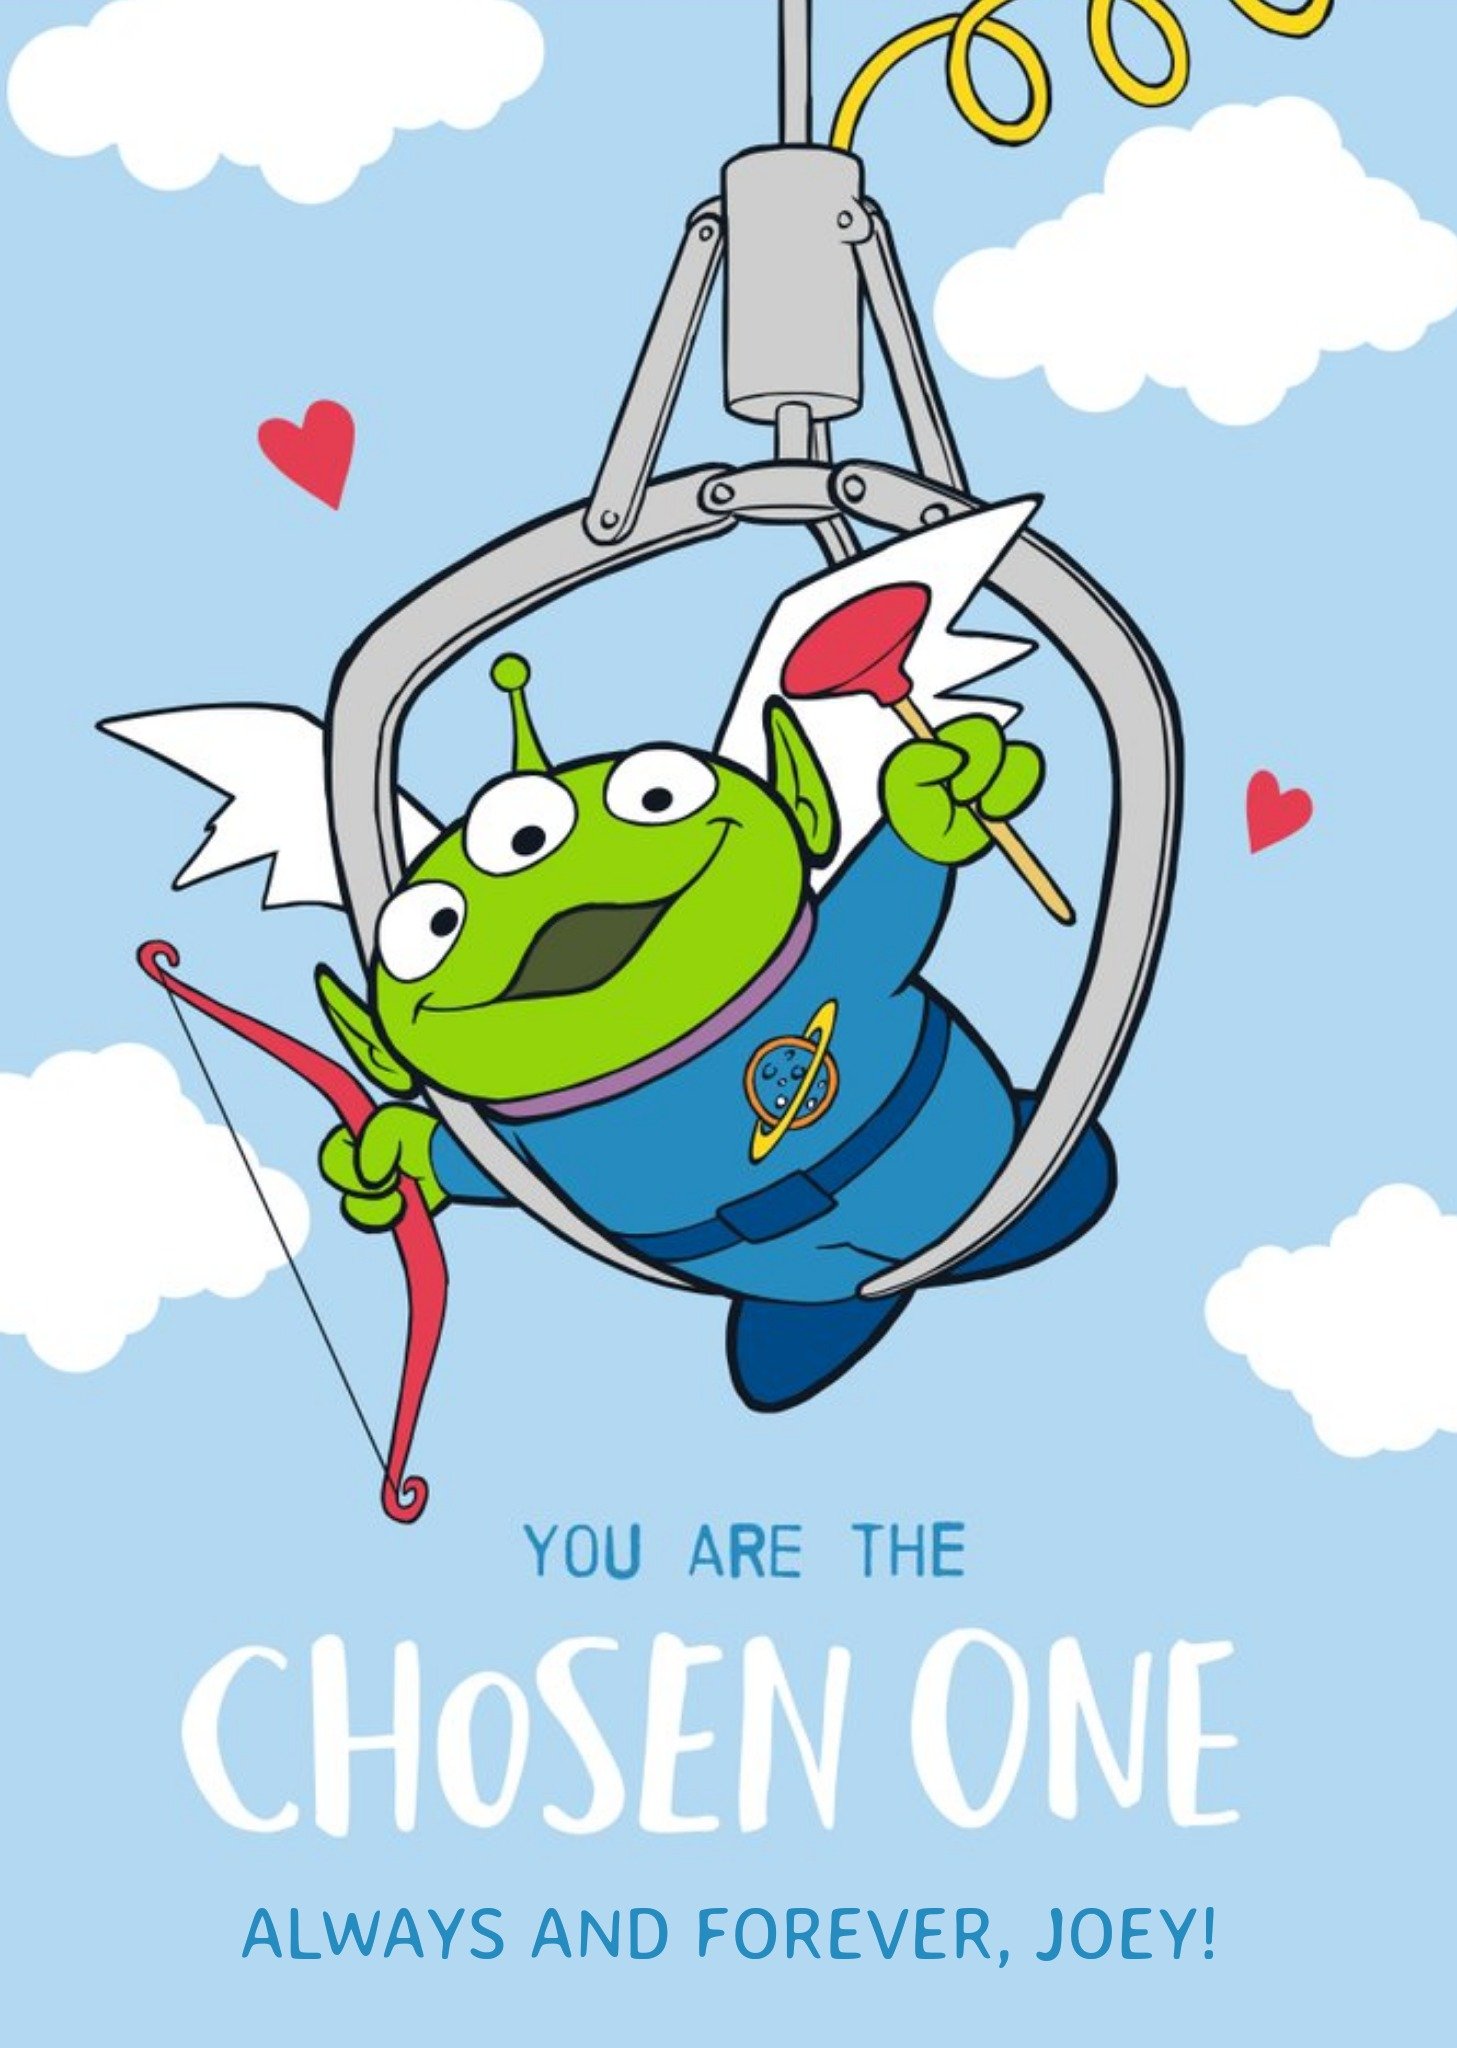 Disney Toy Story Alien Character You Are The Chosen One Anniversary Card Ecard